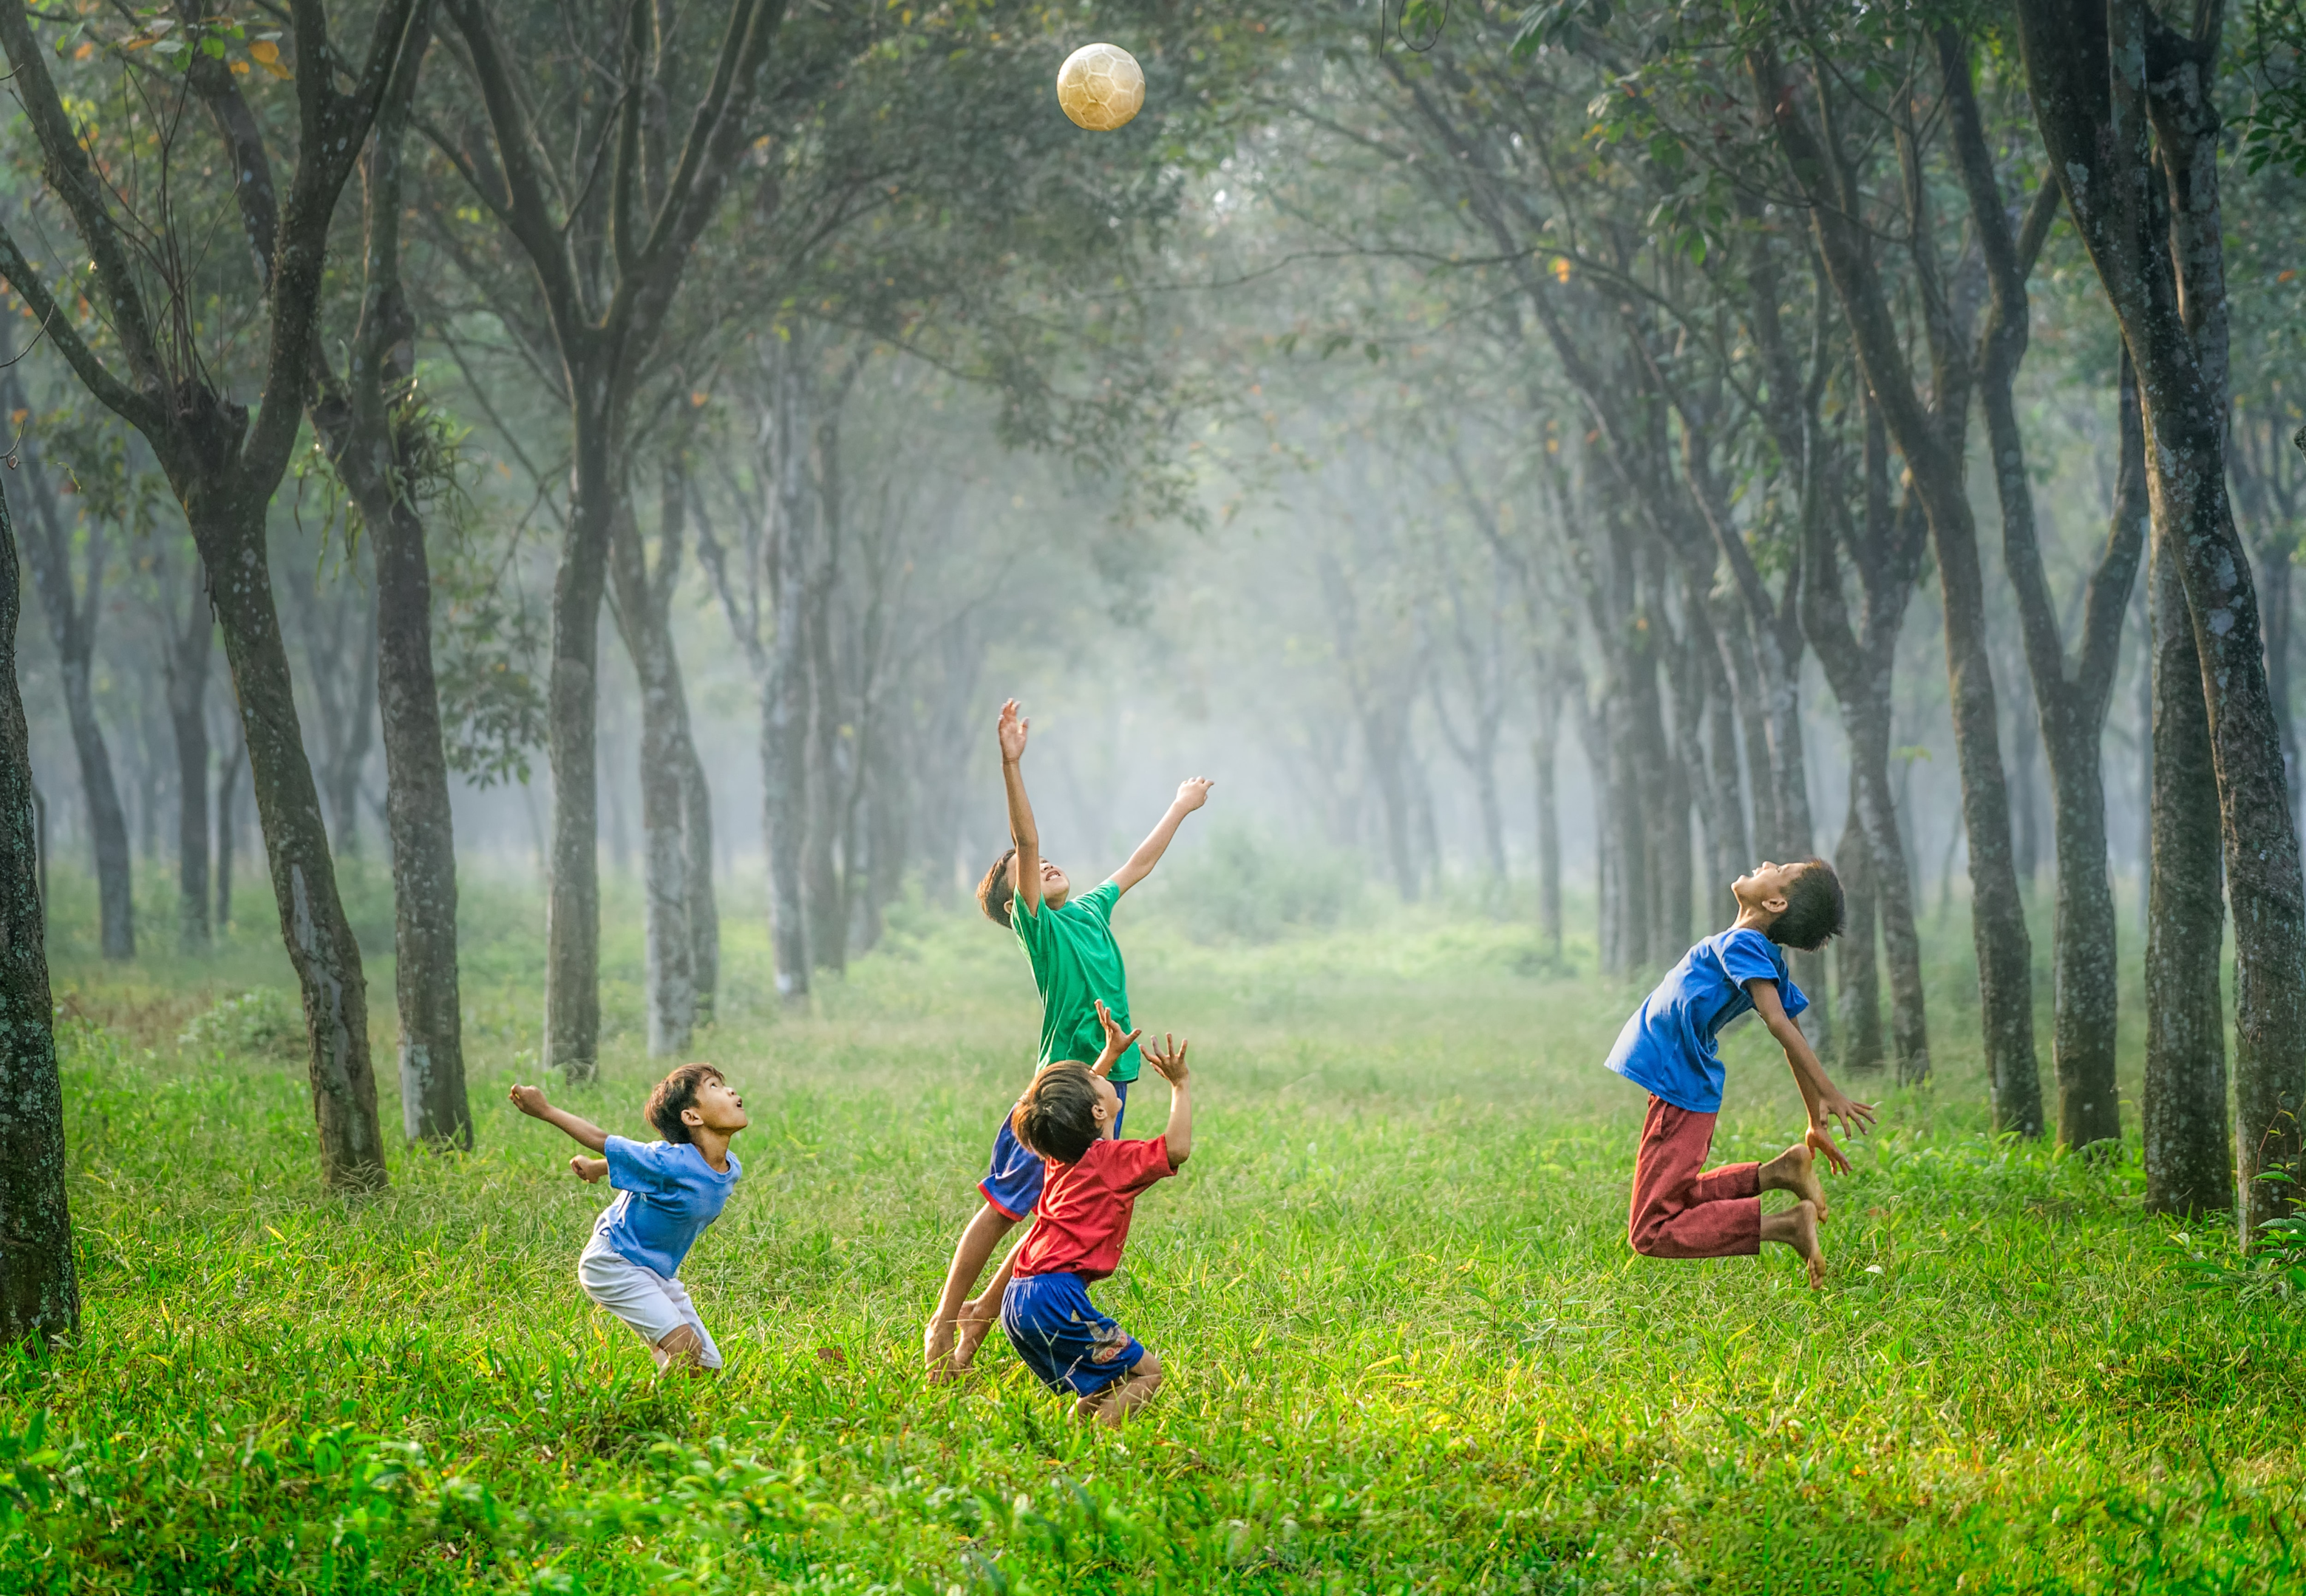 Four kids playing catch in tall green grass.